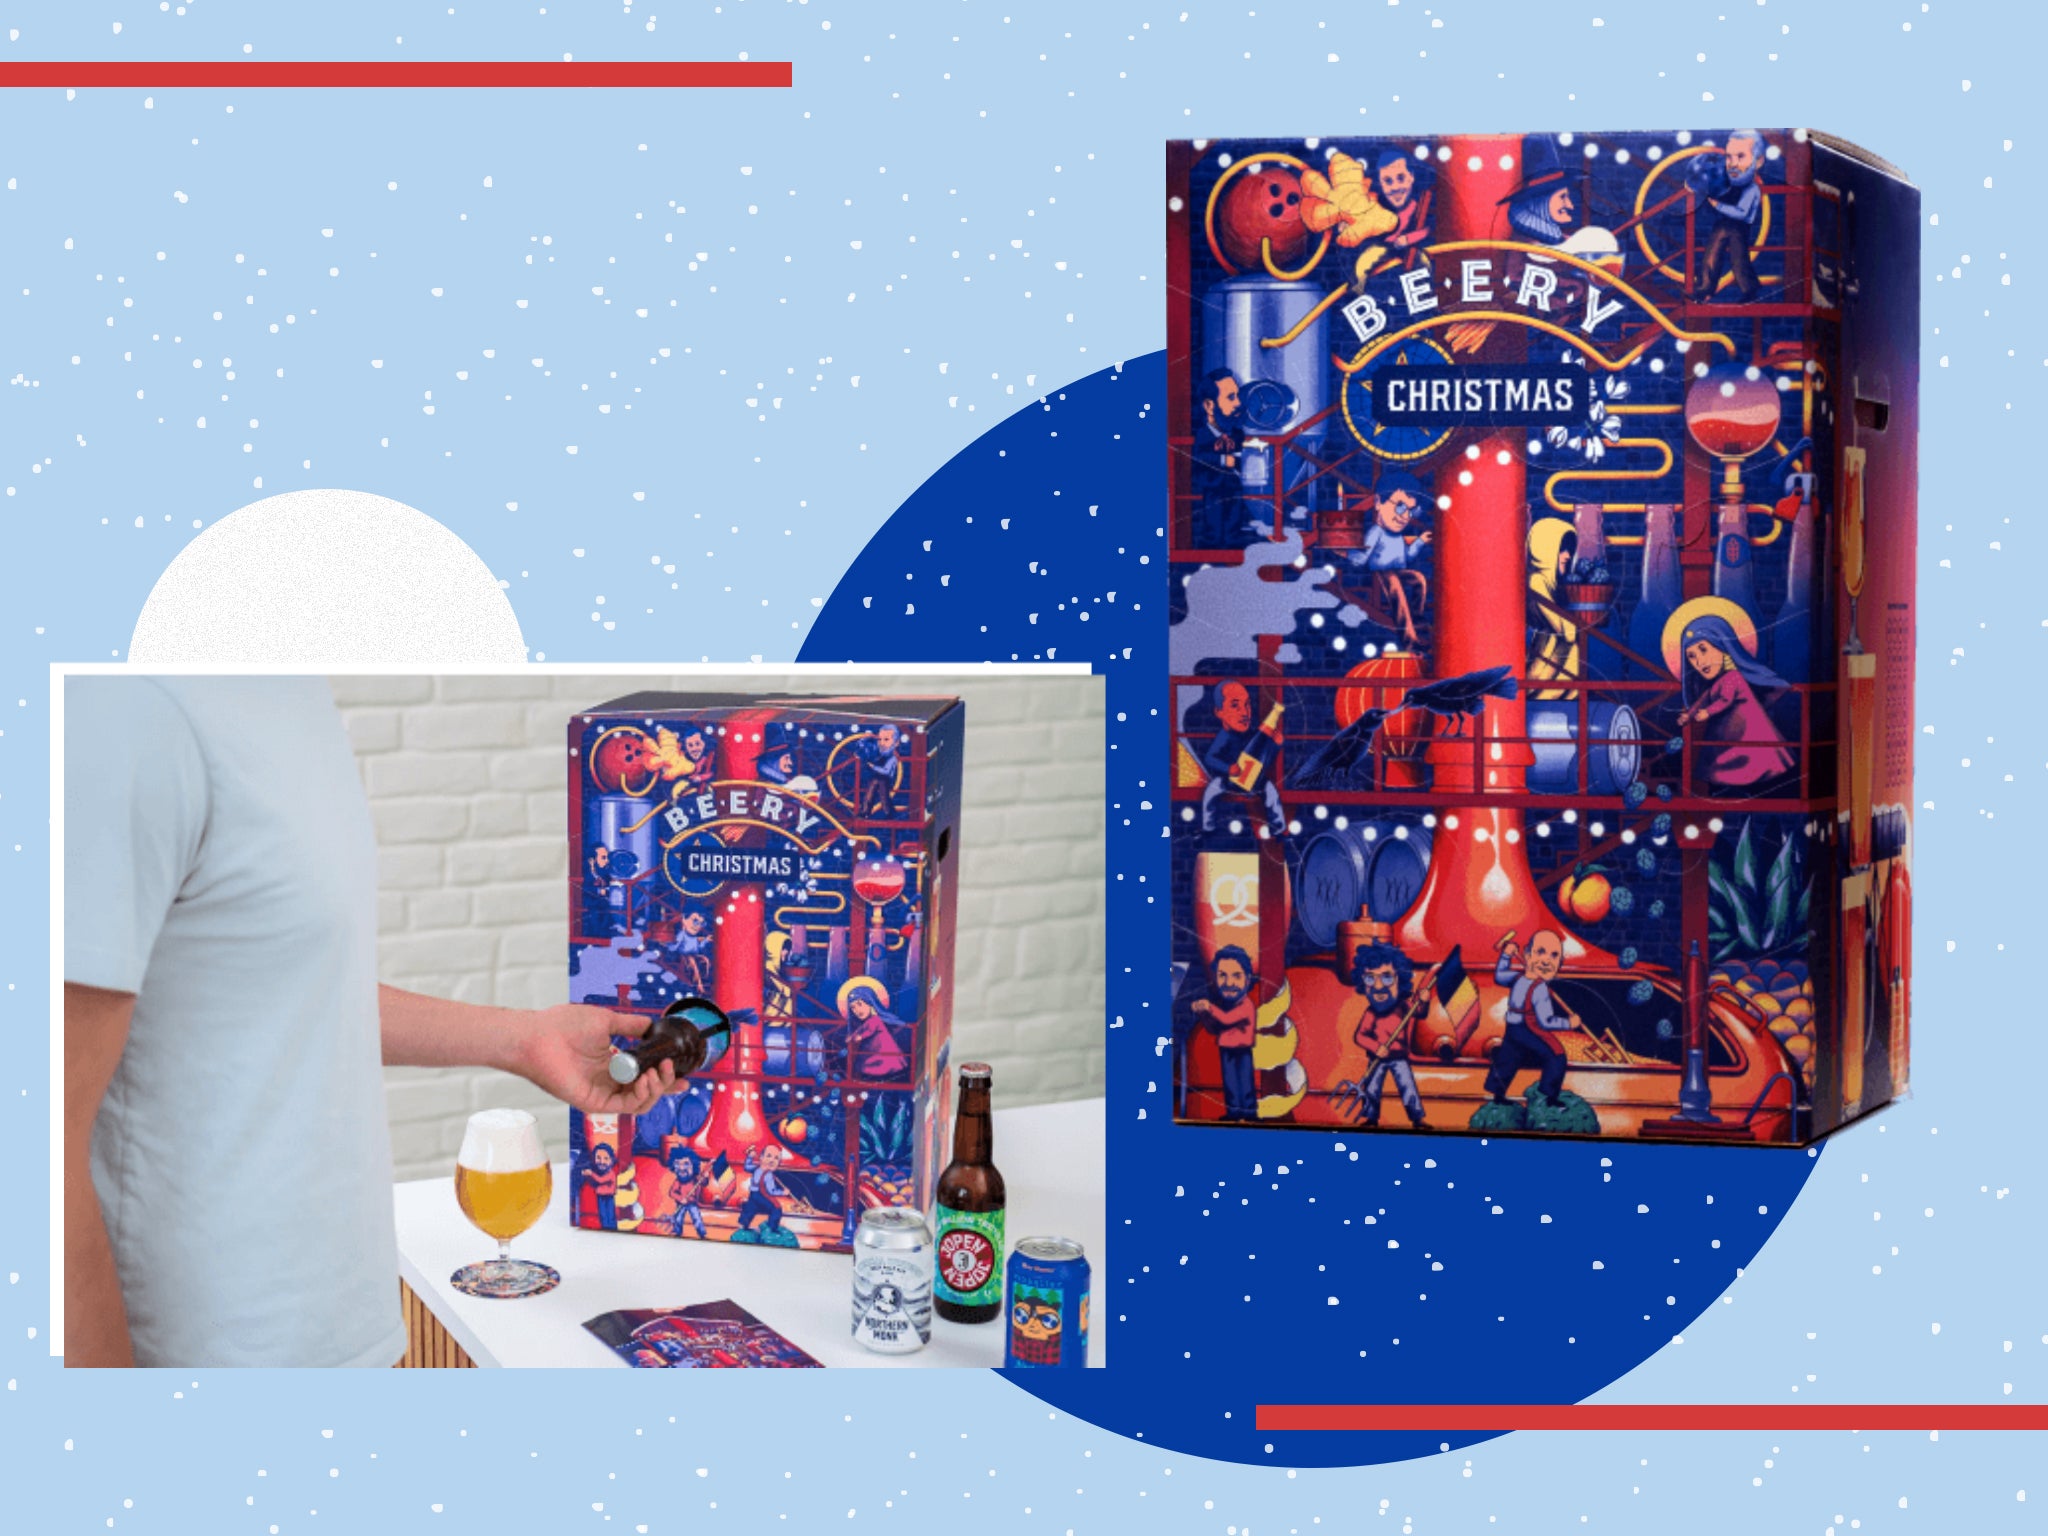 The £75 calendar is available to pre-order now